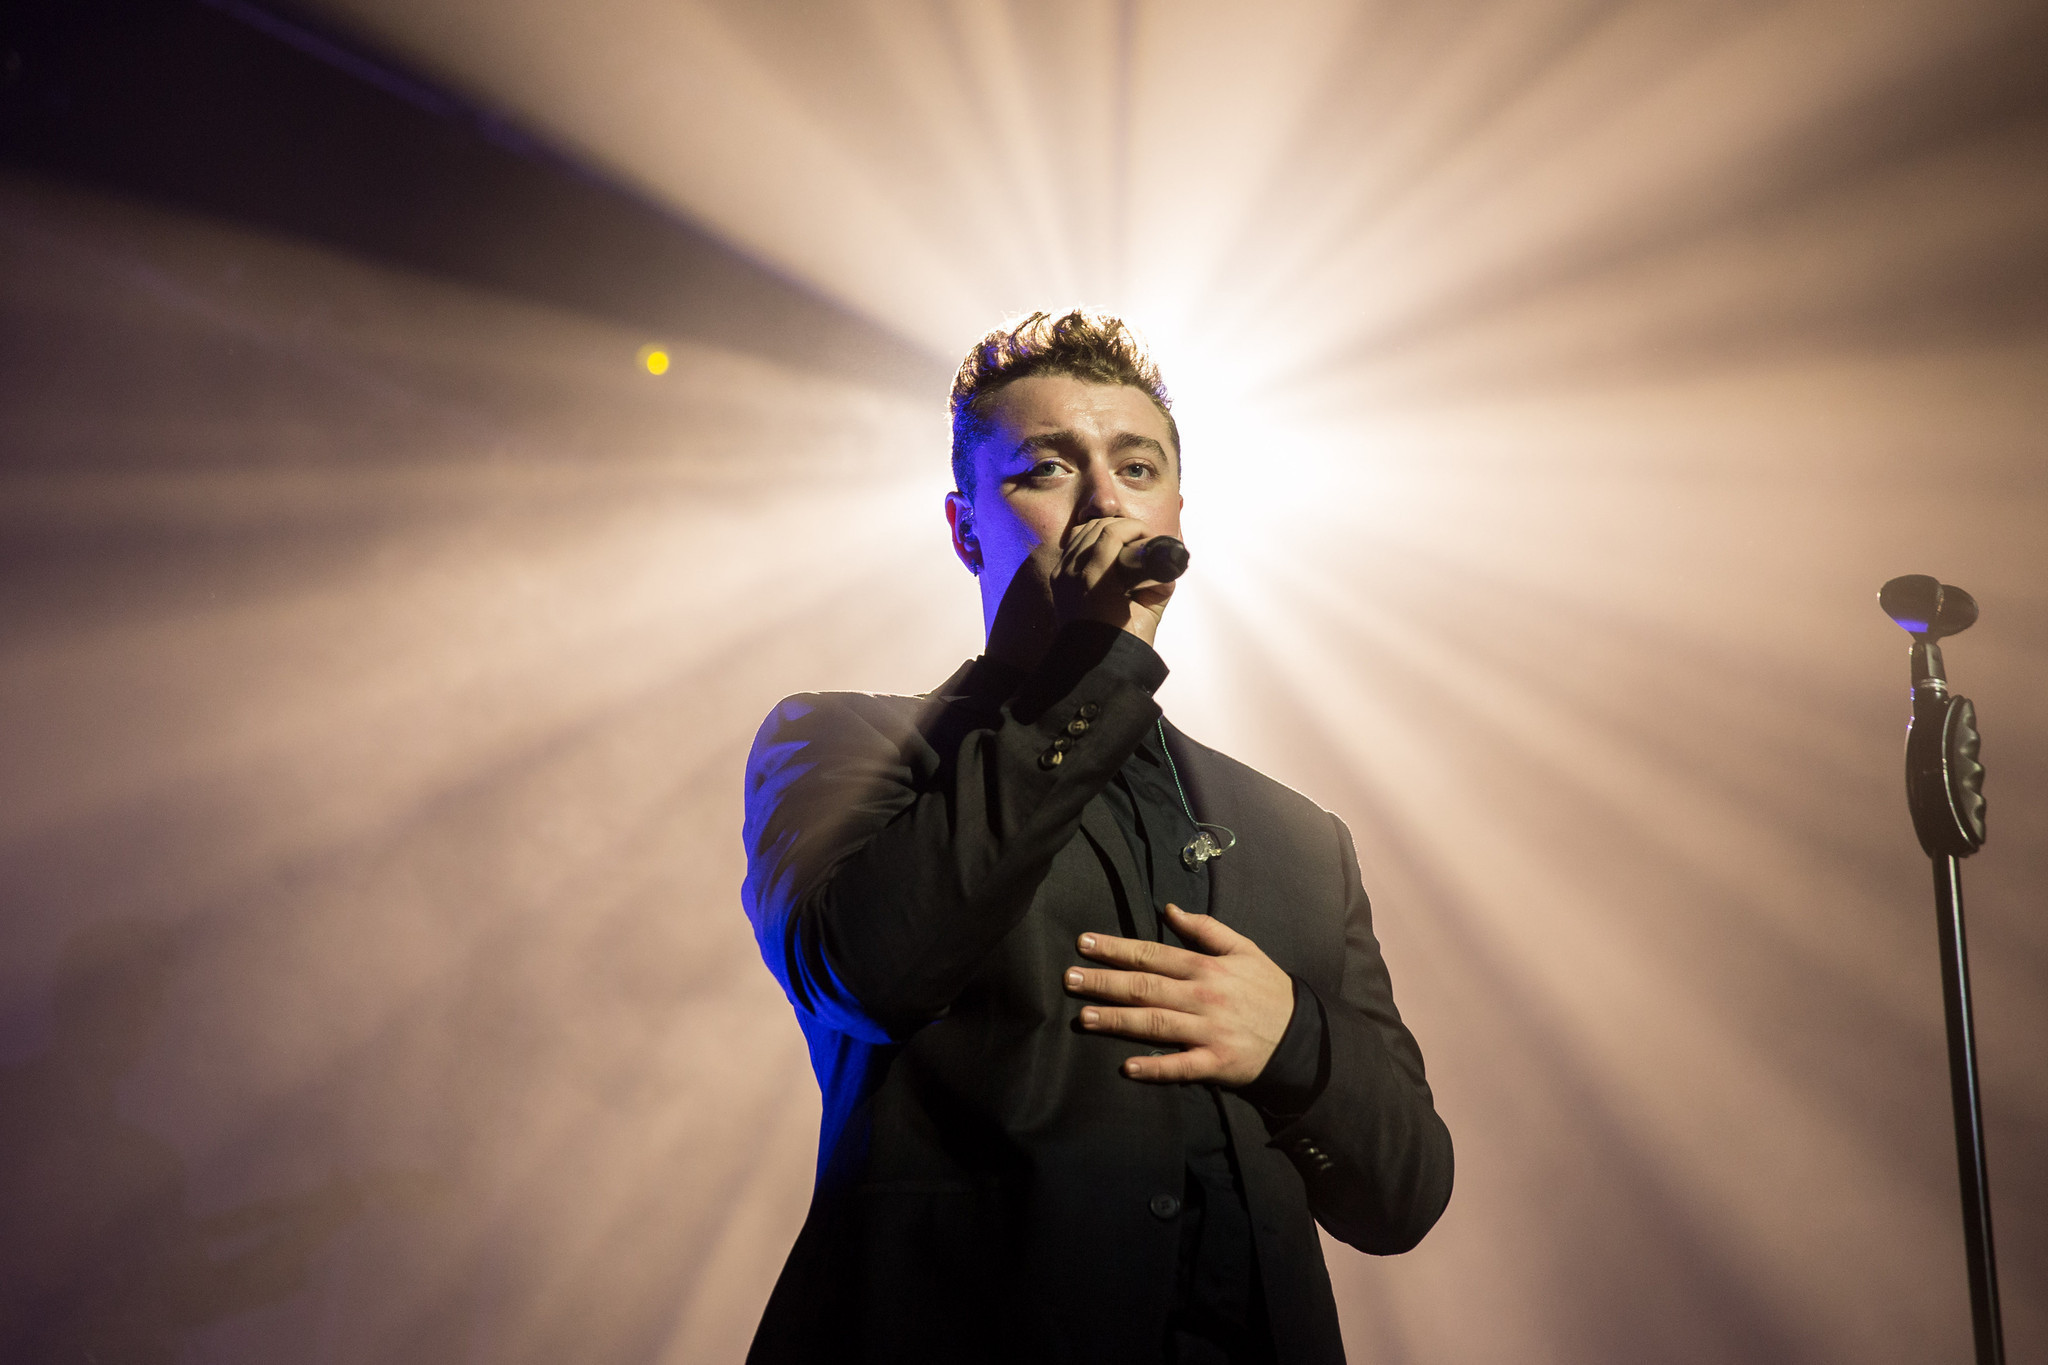 Sam Smith At The Riviera - Sam Smith Concerts , HD Wallpaper & Backgrounds